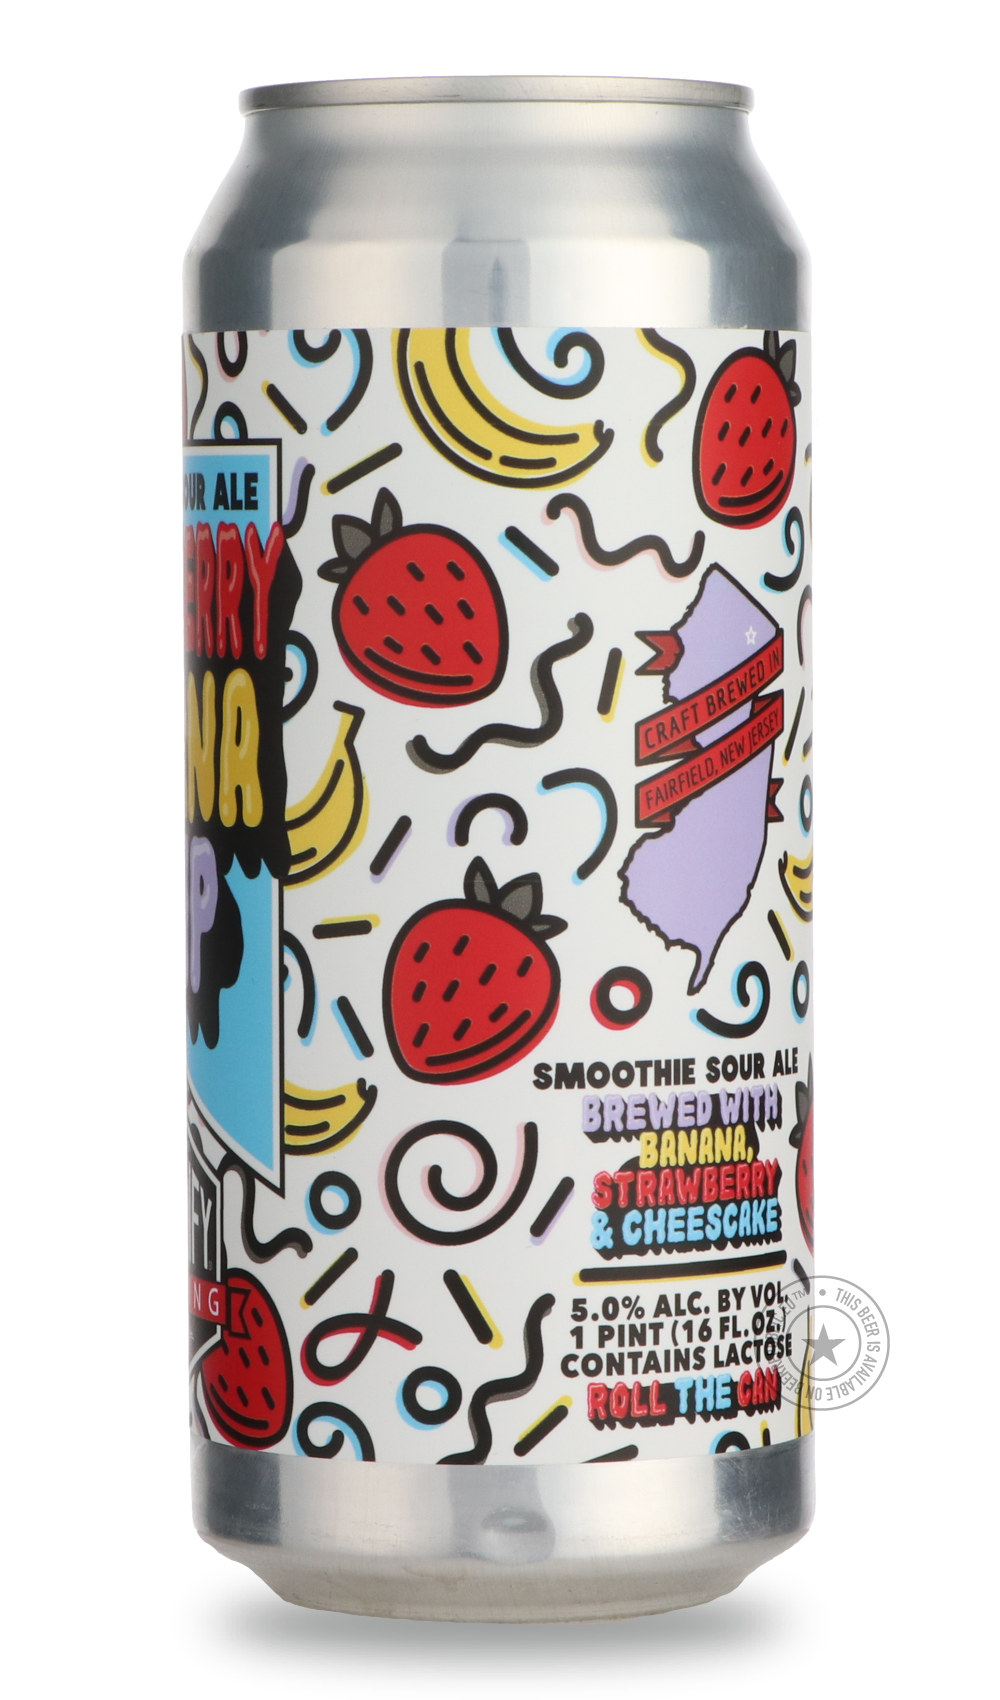 -Magnify- Strawberry Banana Drip-Sour / Wild & Fruity- Only @ Beer Republic - The best online beer store for American & Canadian craft beer - Buy beer online from the USA and Canada - Bier online kopen - Amerikaans bier kopen - Craft beer store - Craft beer kopen - Amerikanisch bier kaufen - Bier online kaufen - Acheter biere online - IPA - Stout - Porter - New England IPA - Hazy IPA - Imperial Stout - Barrel Aged - Barrel Aged Imperial Stout - Brown - Dark beer - Blond - Blonde - Pilsner - Lager - Wheat - 